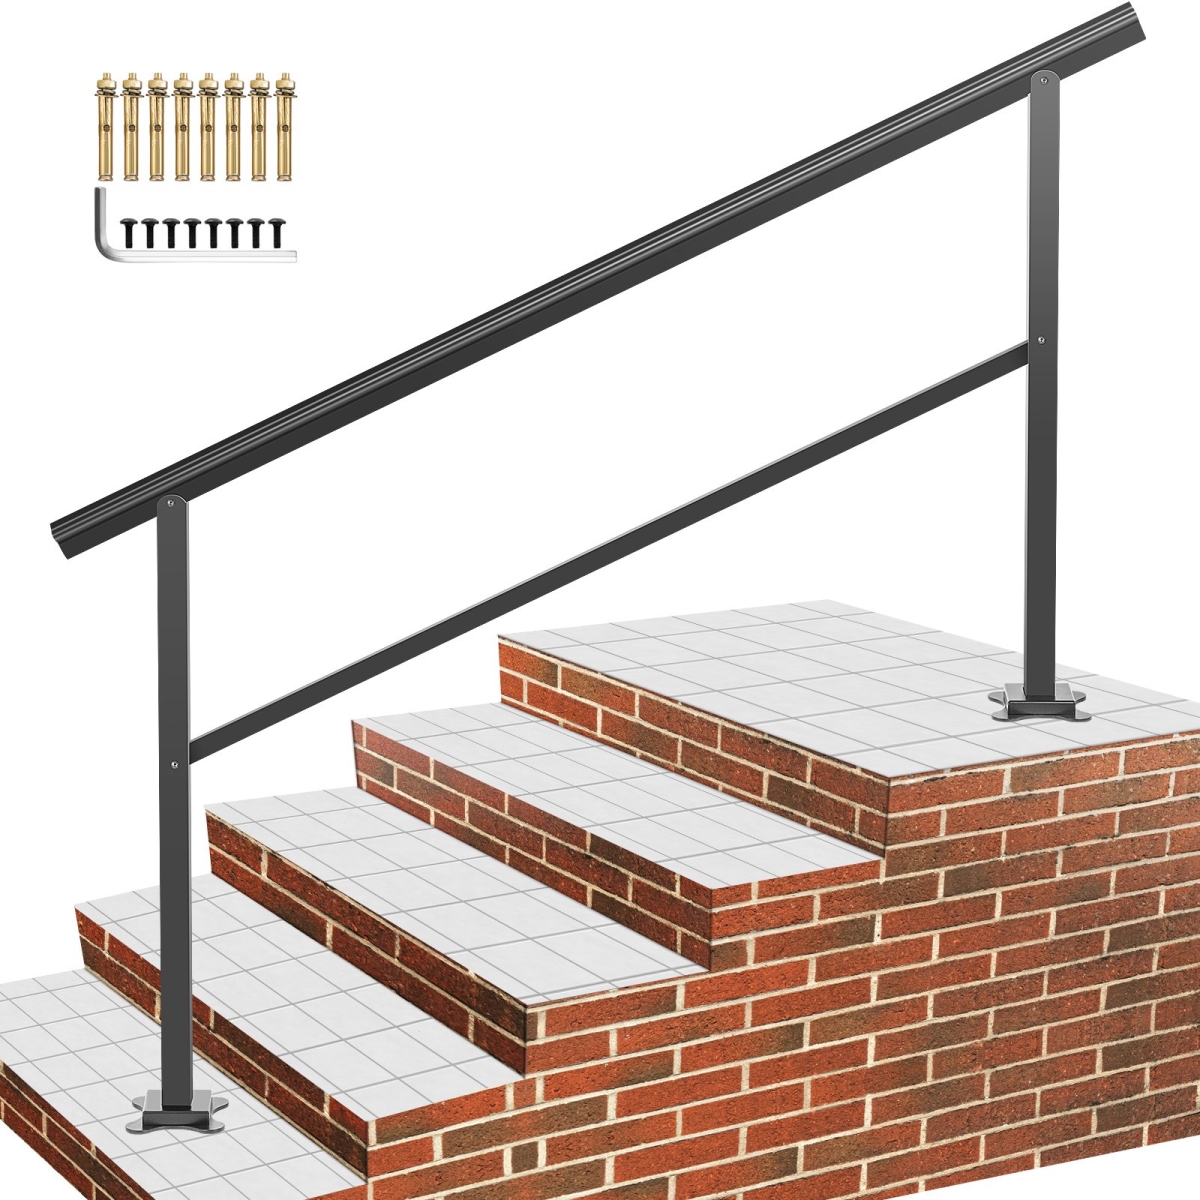 Picture of Vevor TFDGLZHS5FT585EFIV0 165 lbs Load Handrail Outdoor Stairs Aluminum Stair Handrail